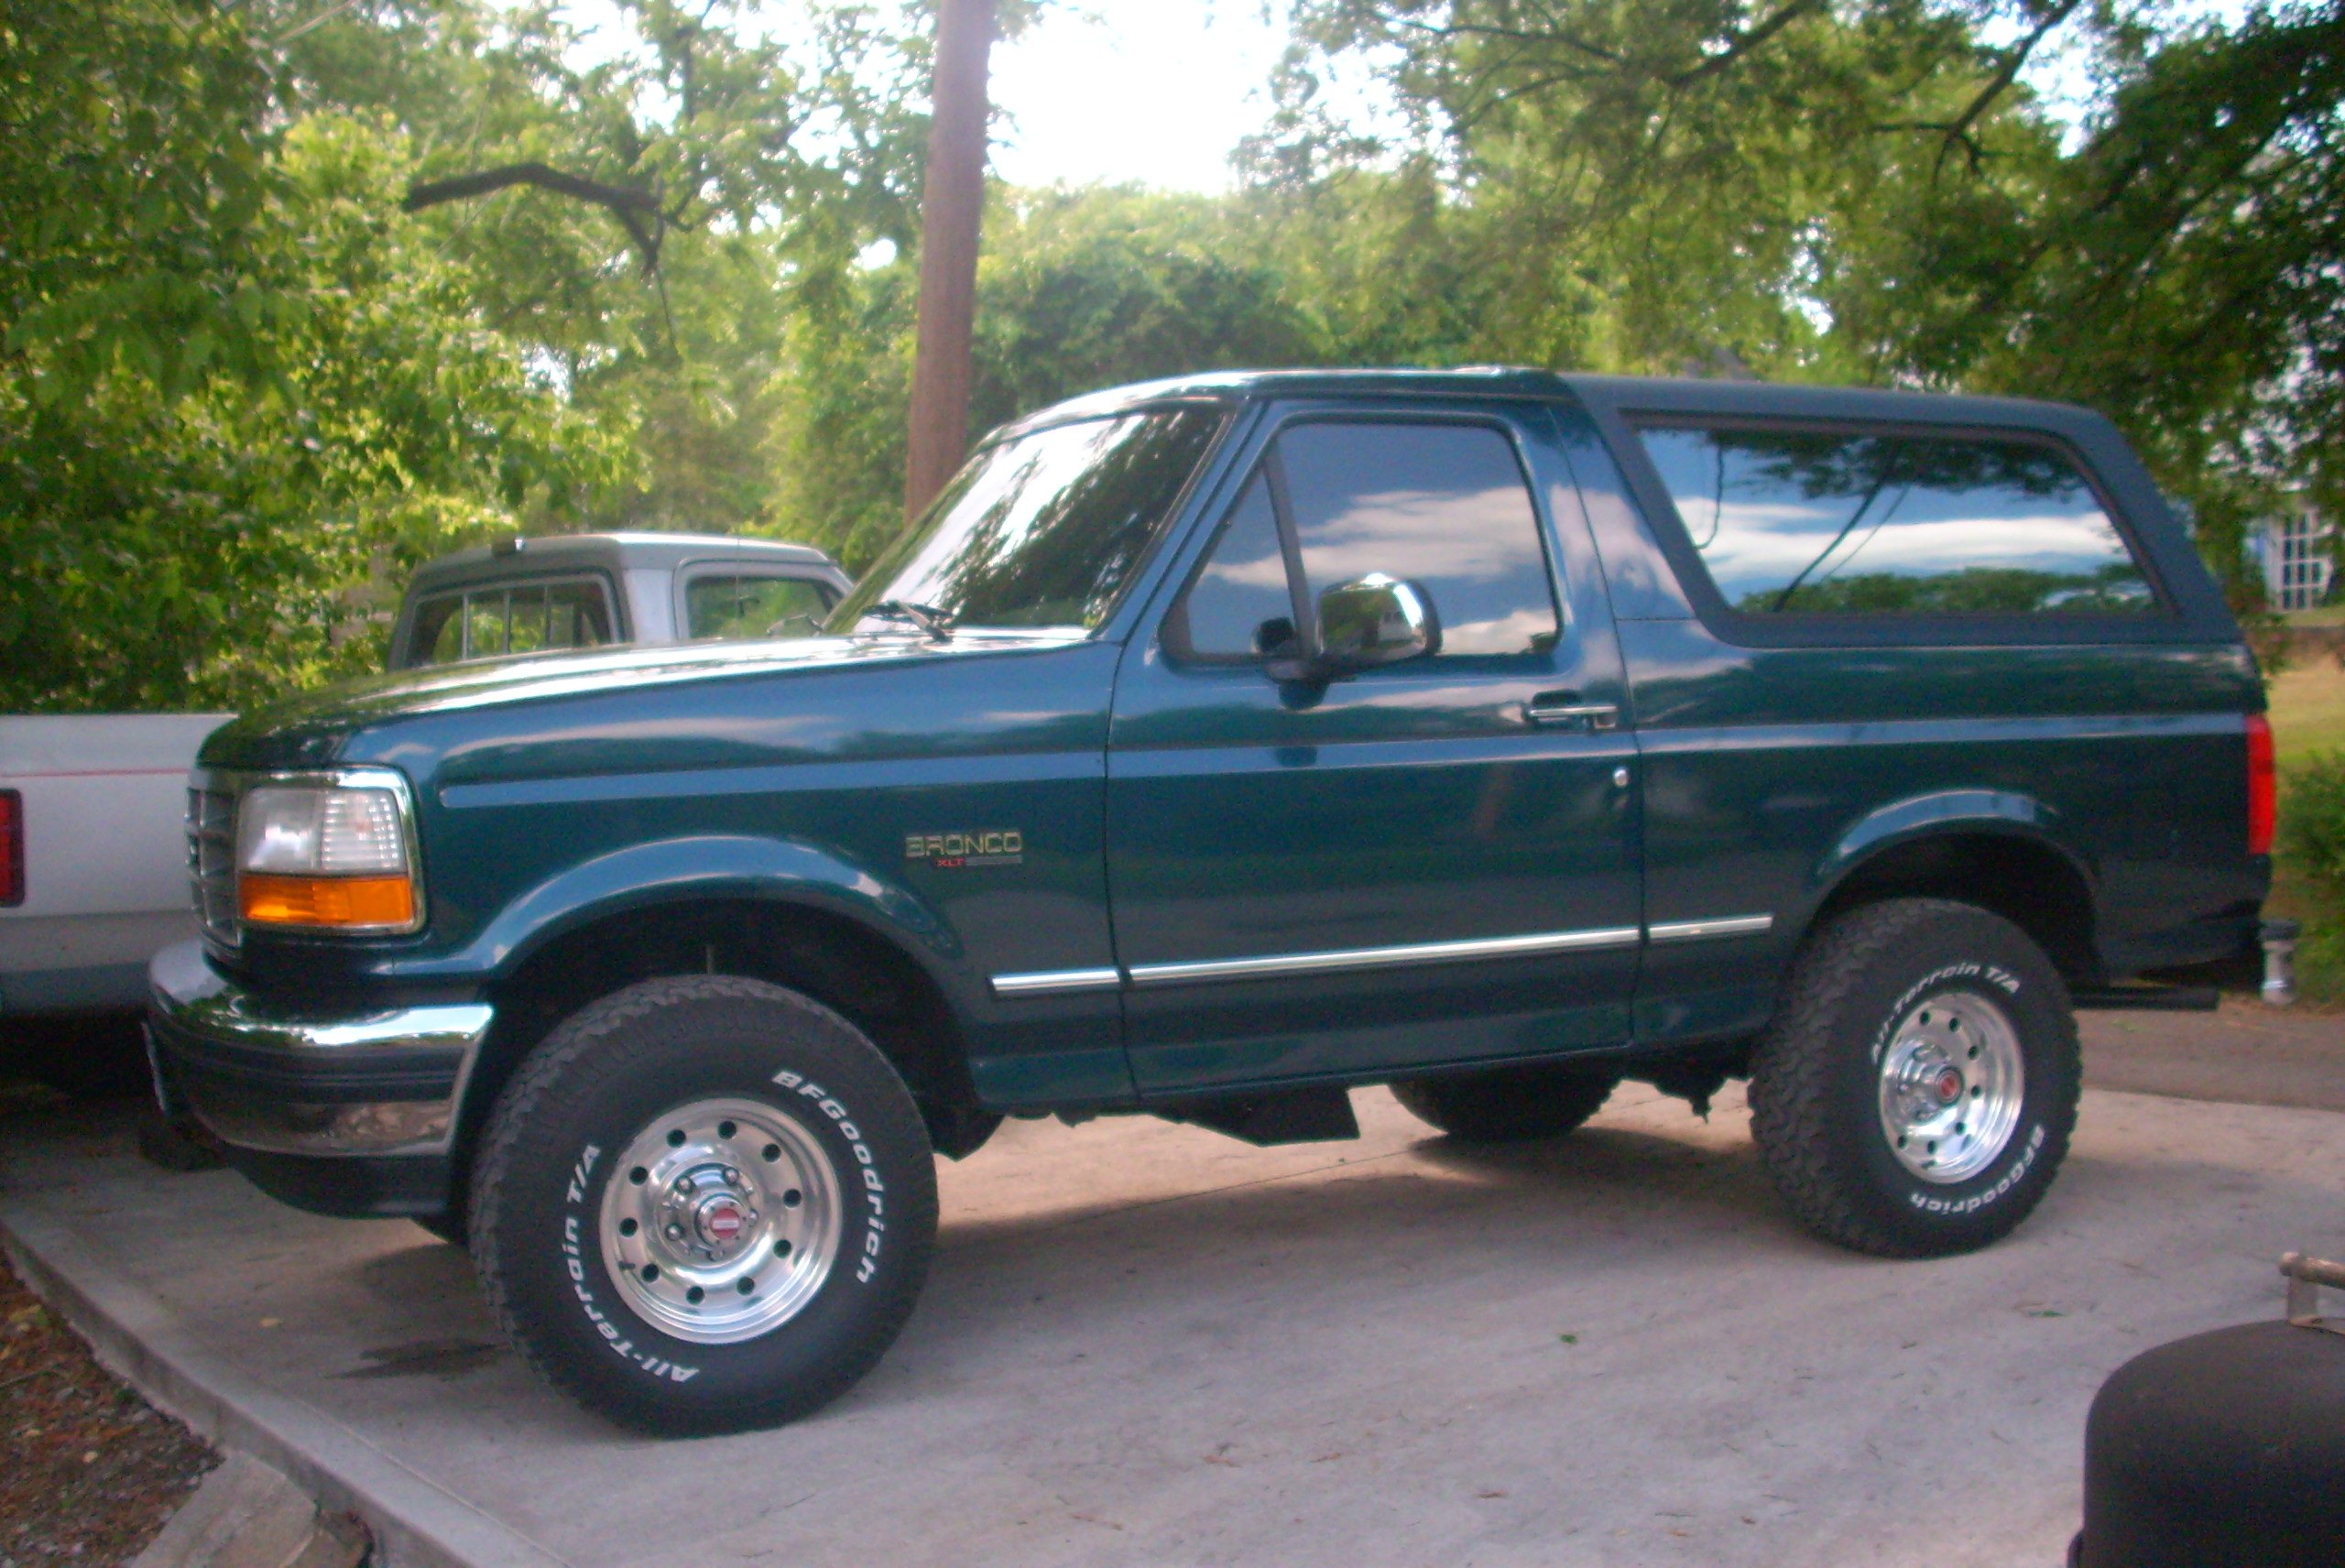 1990 Ford bronco stock tire size #9